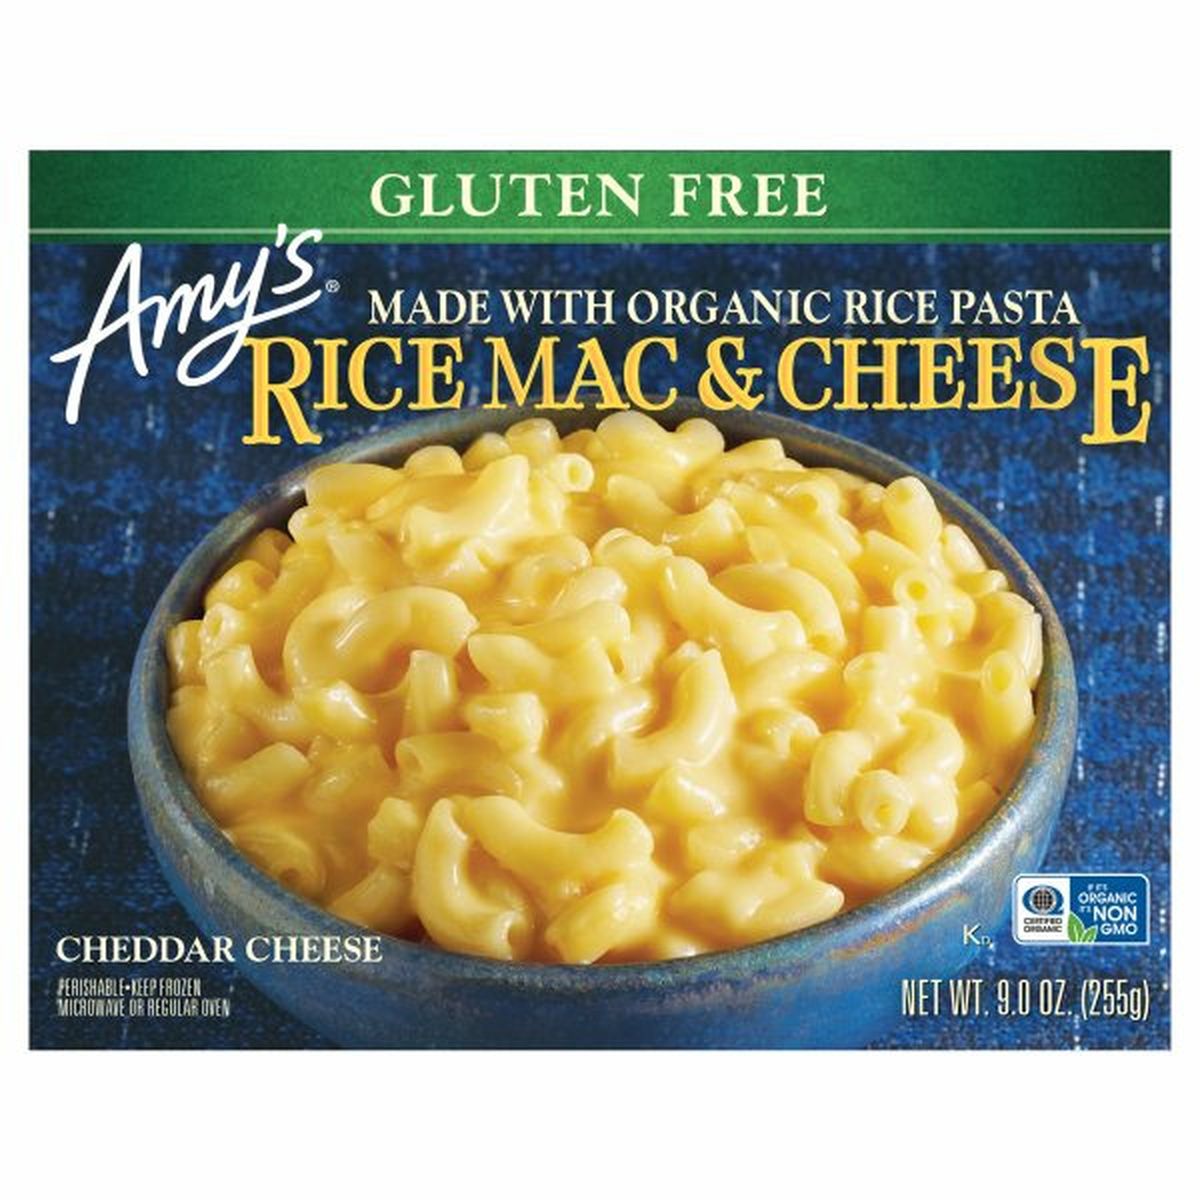 Calories in Amy's Kitchen Rice Mac & Cheese, Cheddar Cheese, Gluten Free